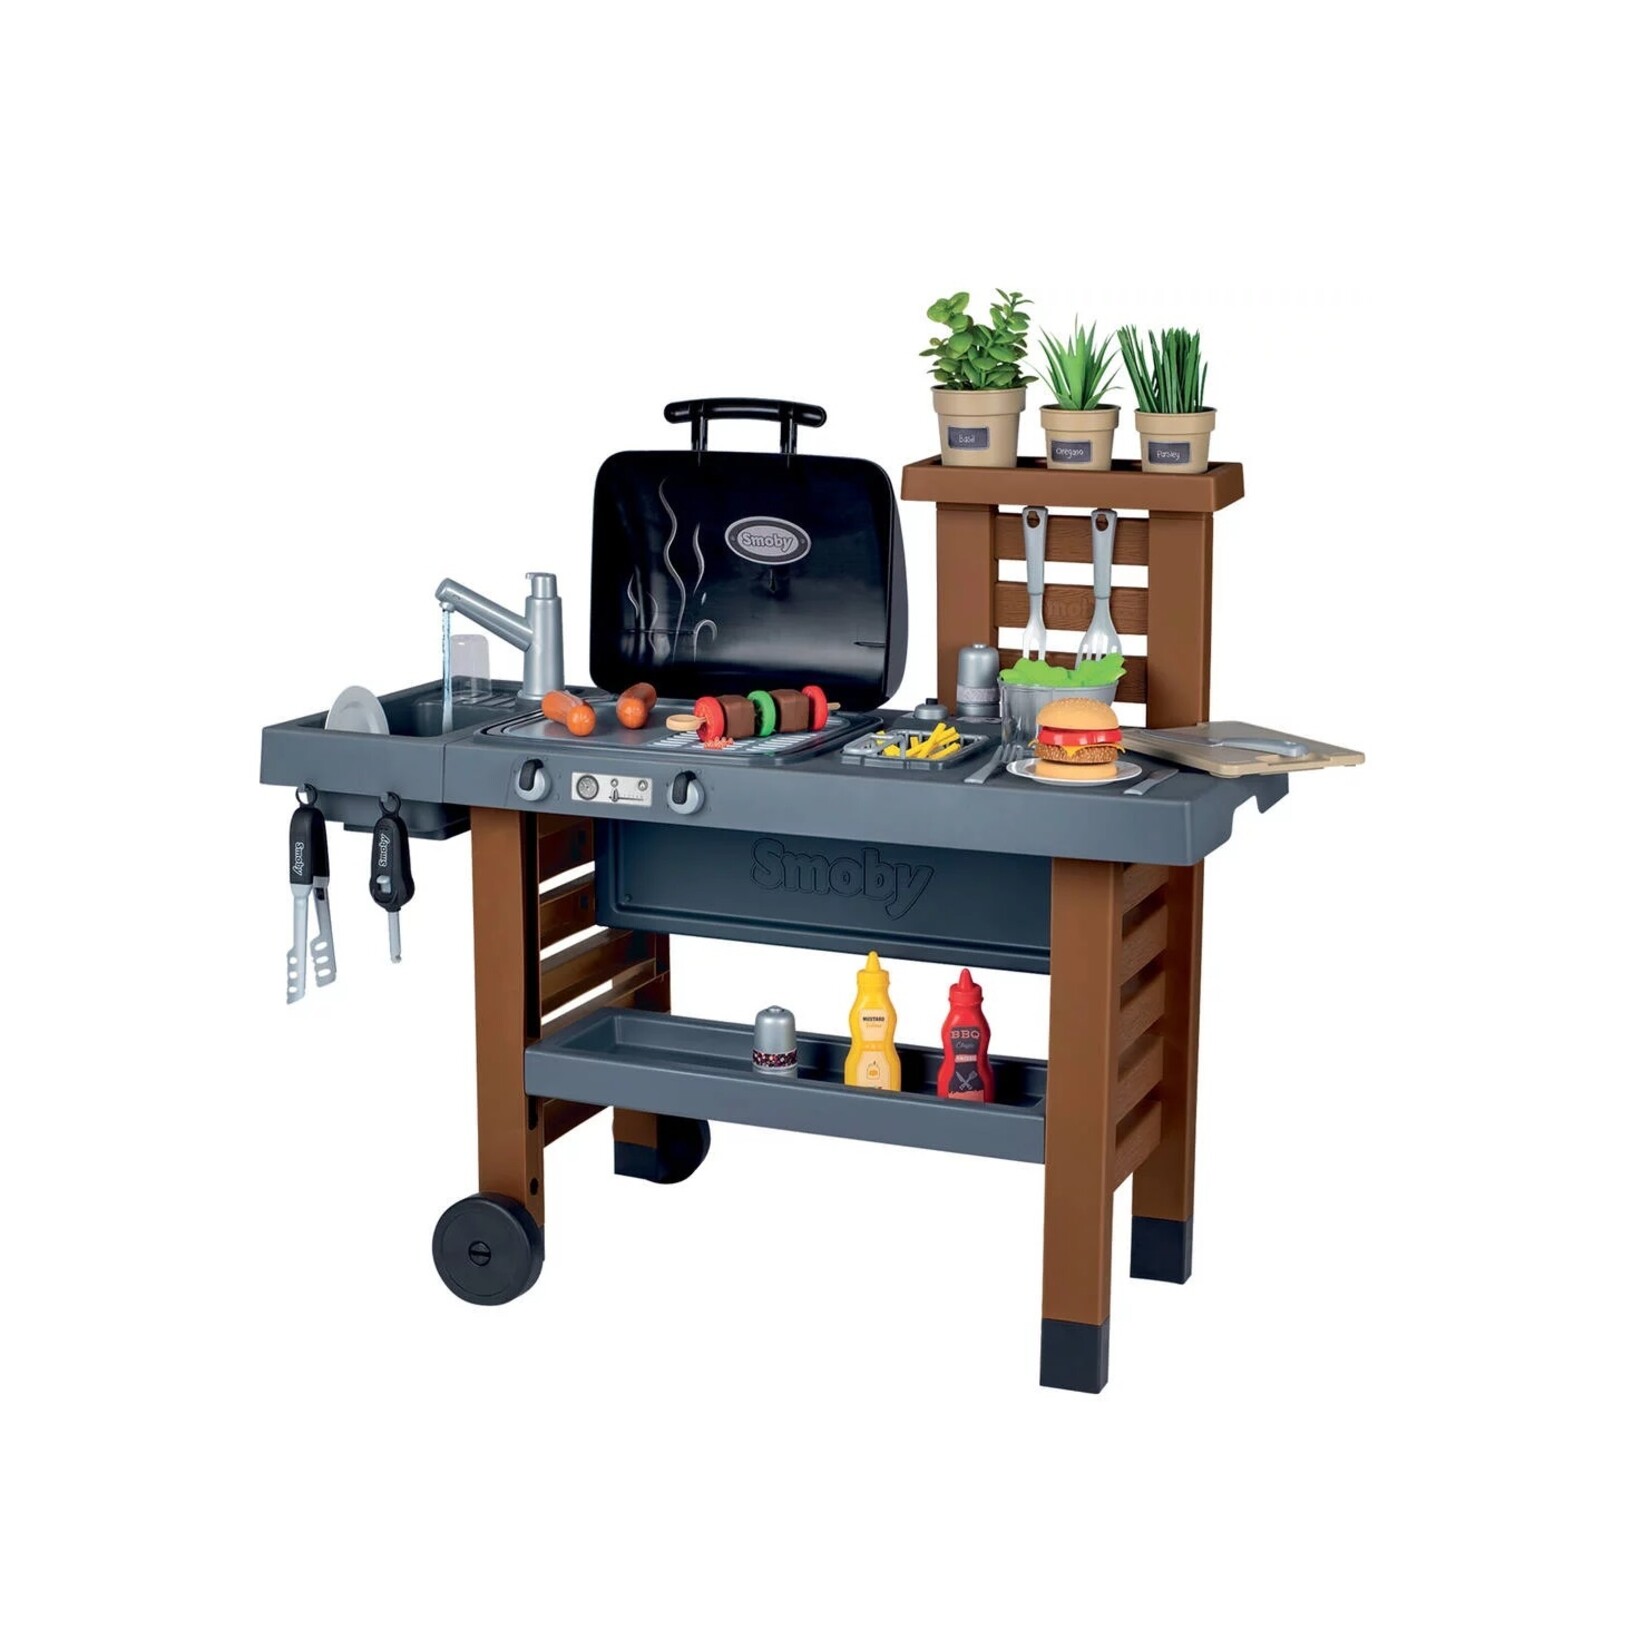 Smoby Smoby - Garden Kitchen BBQ (Ramassage seulement)